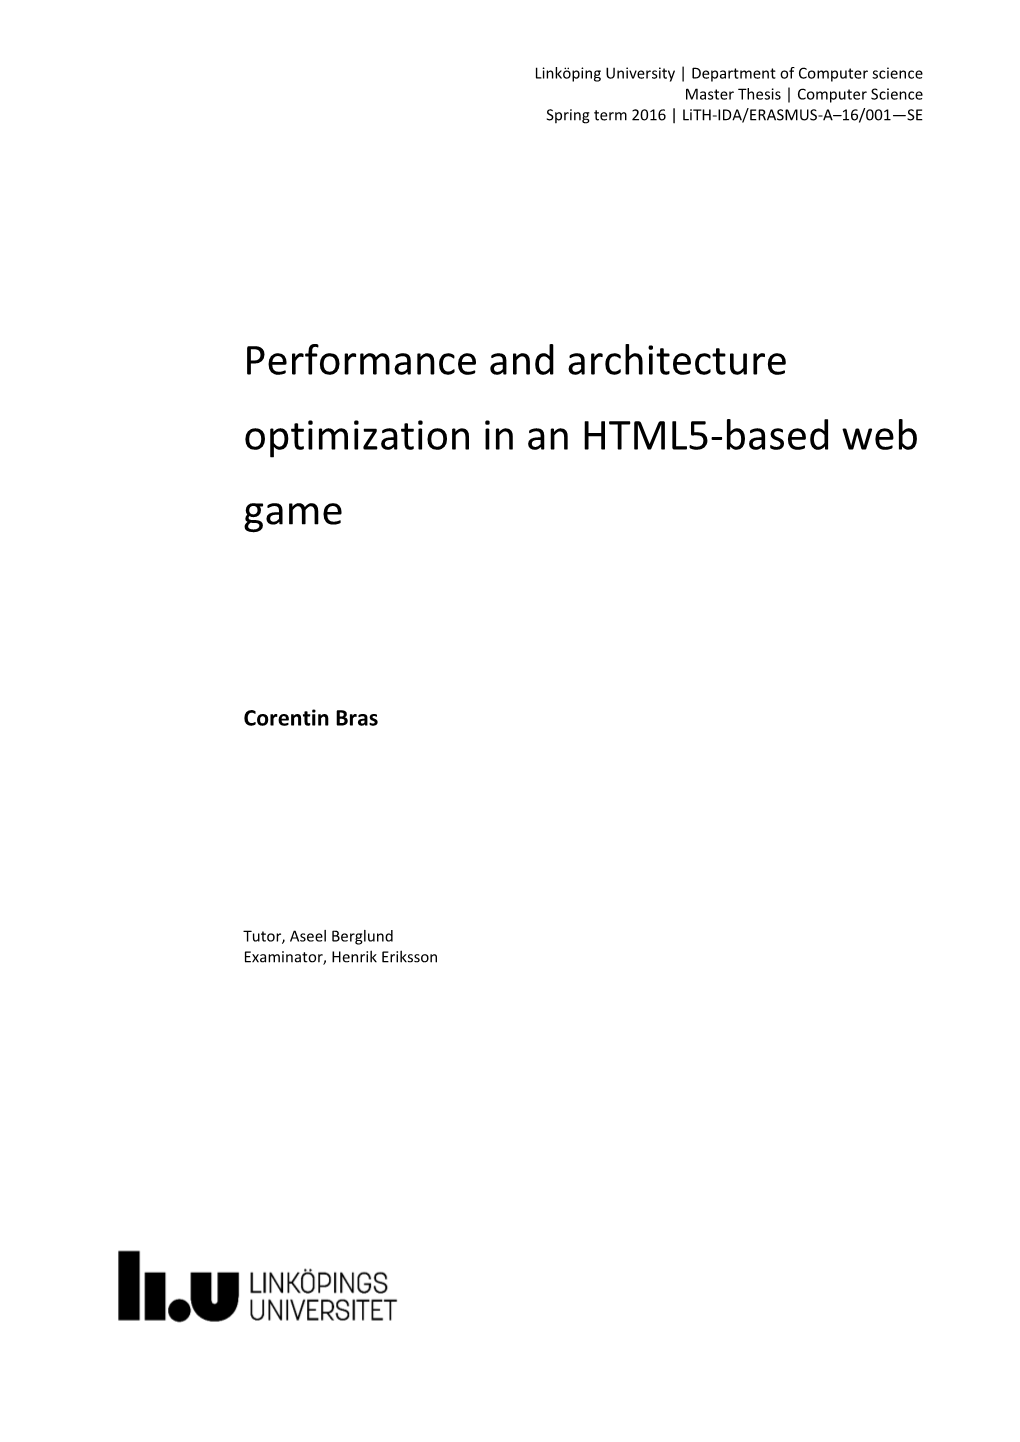 Performance and Architecture Optimization in an HTML5-Based Web Game